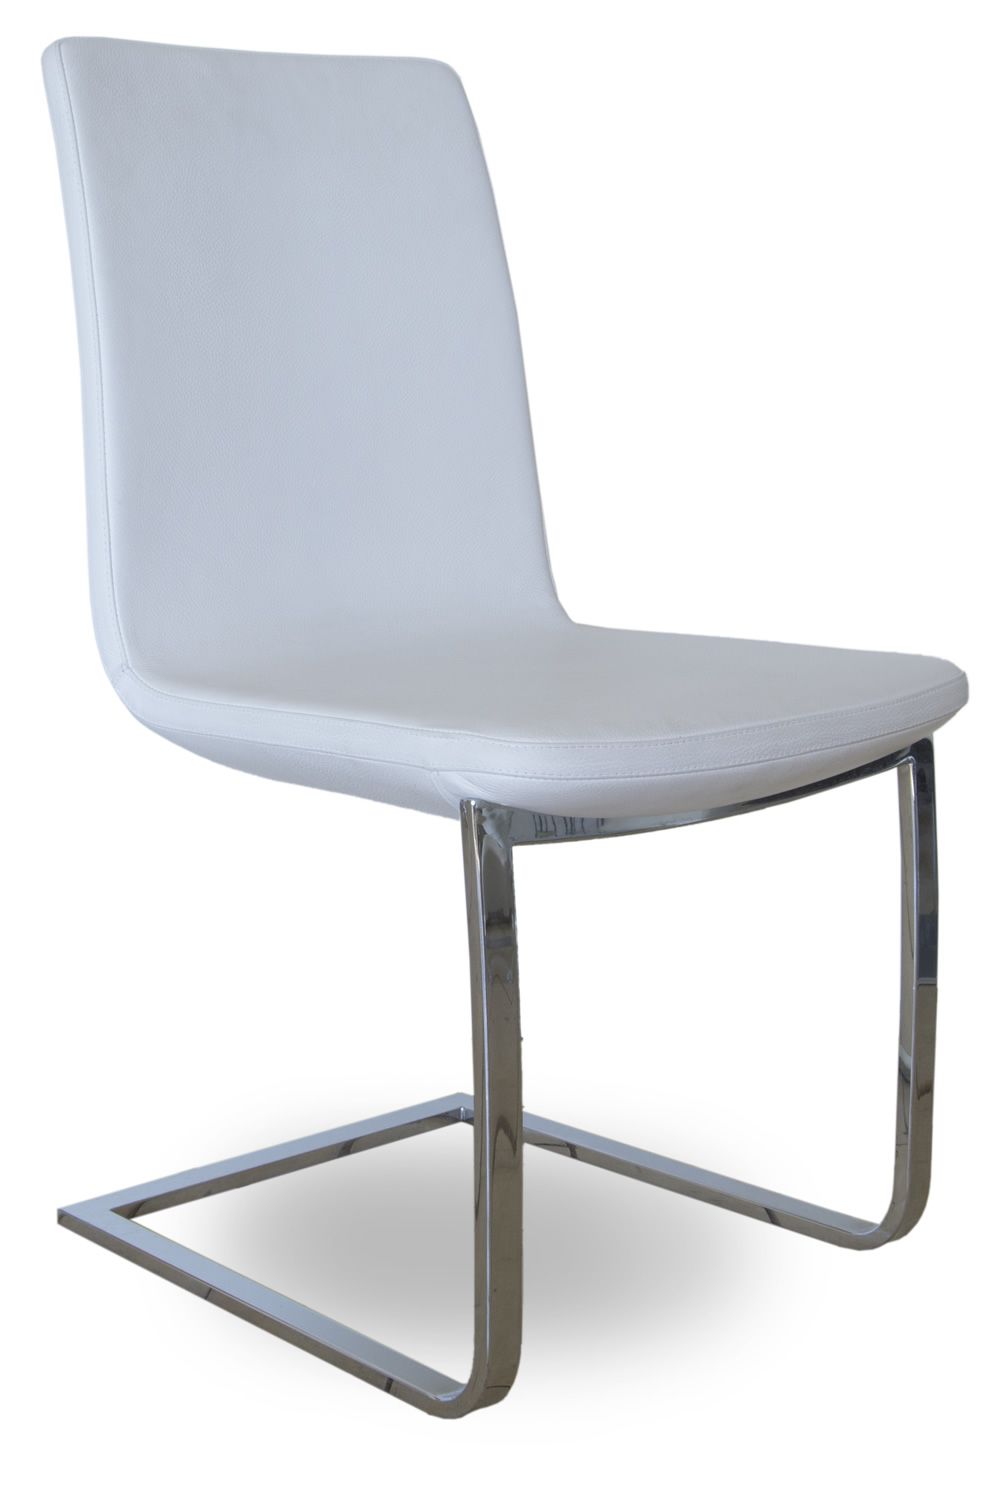 Breeze Design Chair By Tonon With Metal Sled Structure Seat